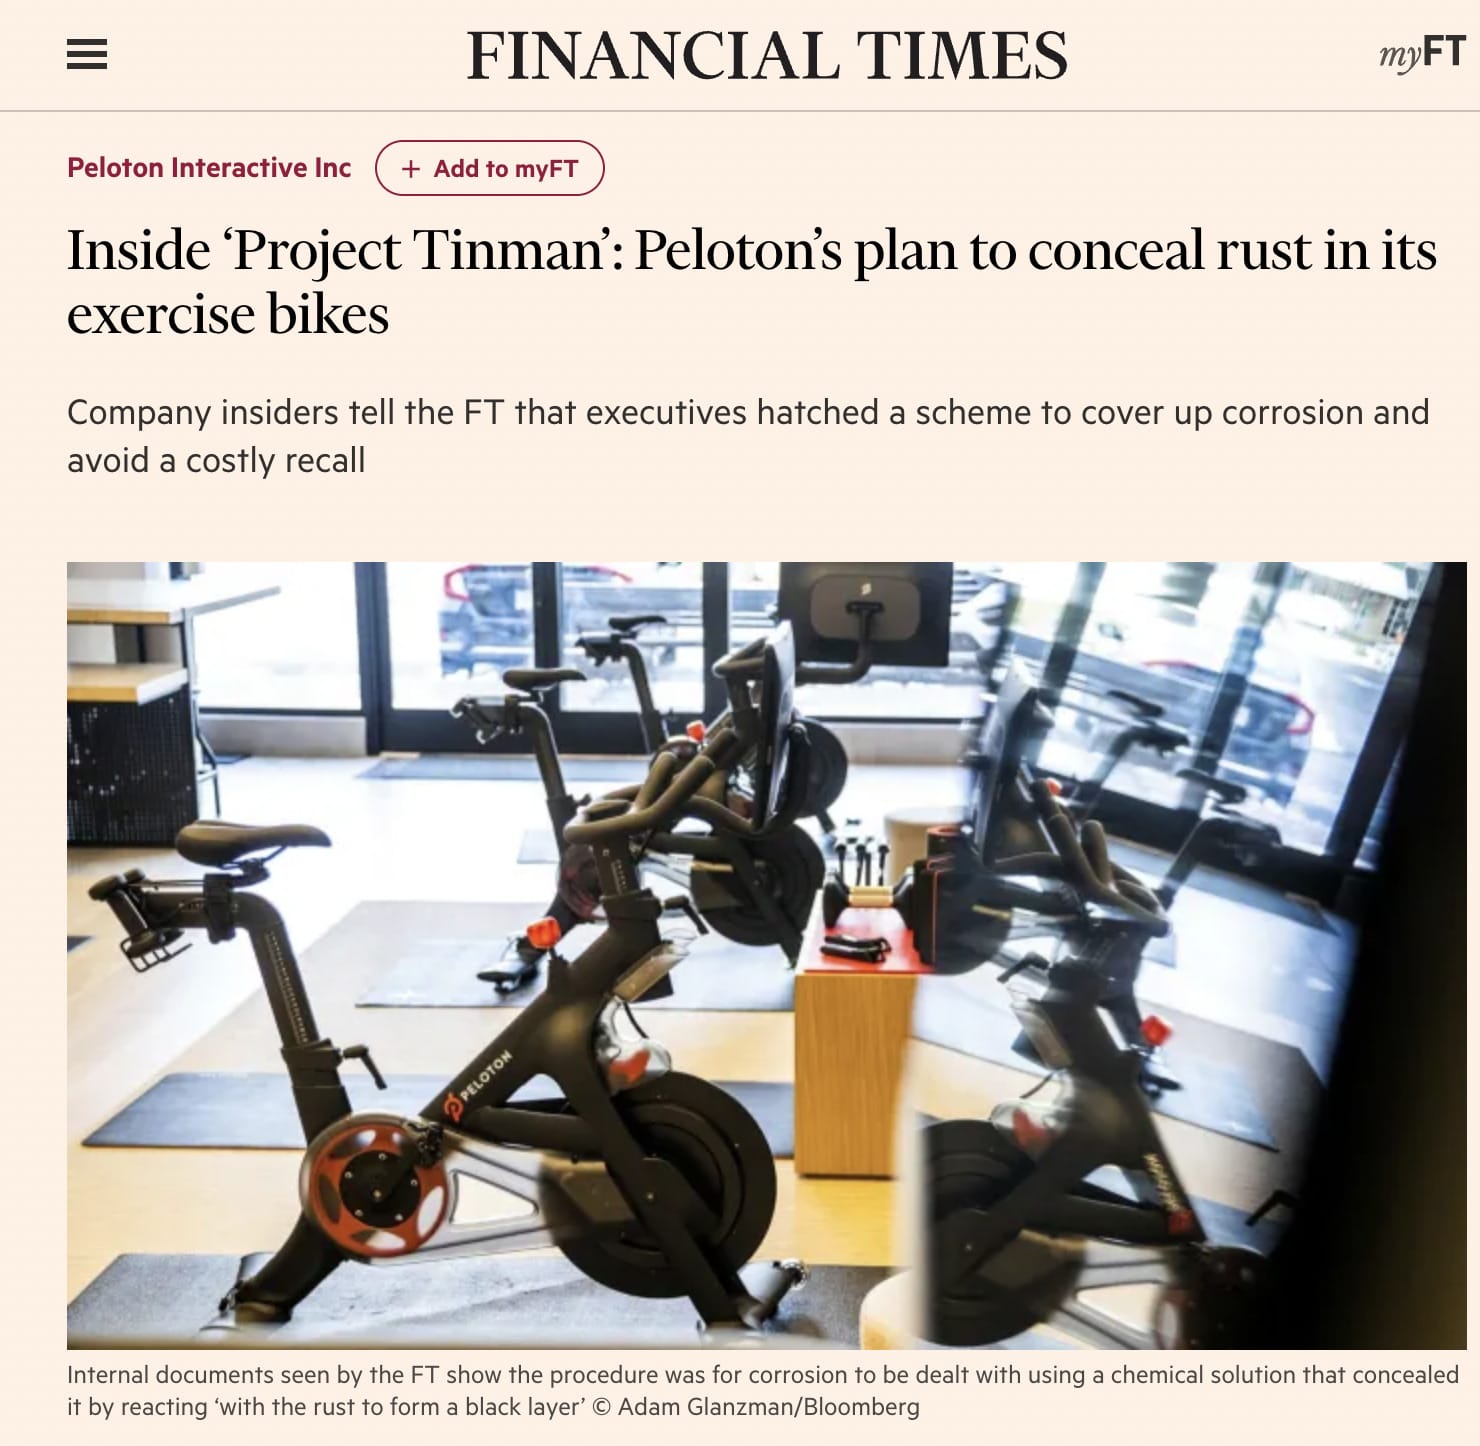 The Financial Times Reporting on Project Tinman